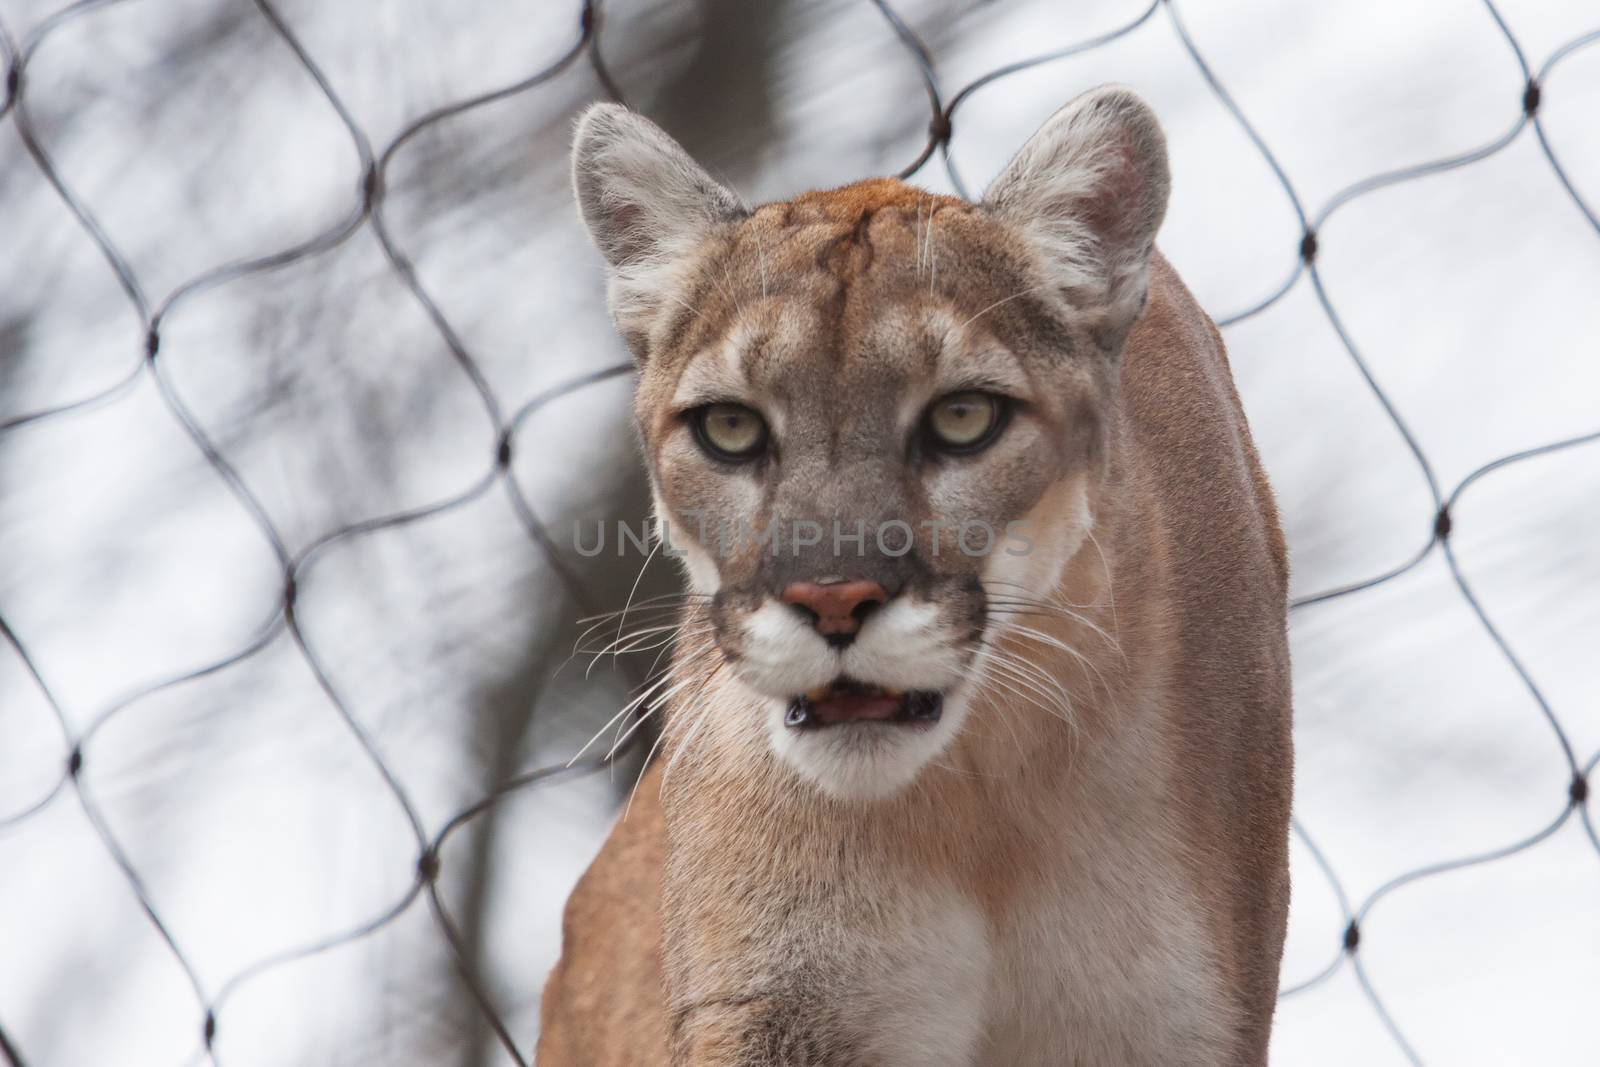 Mountain Lion- Puma - Cougar close up  by Coffee999